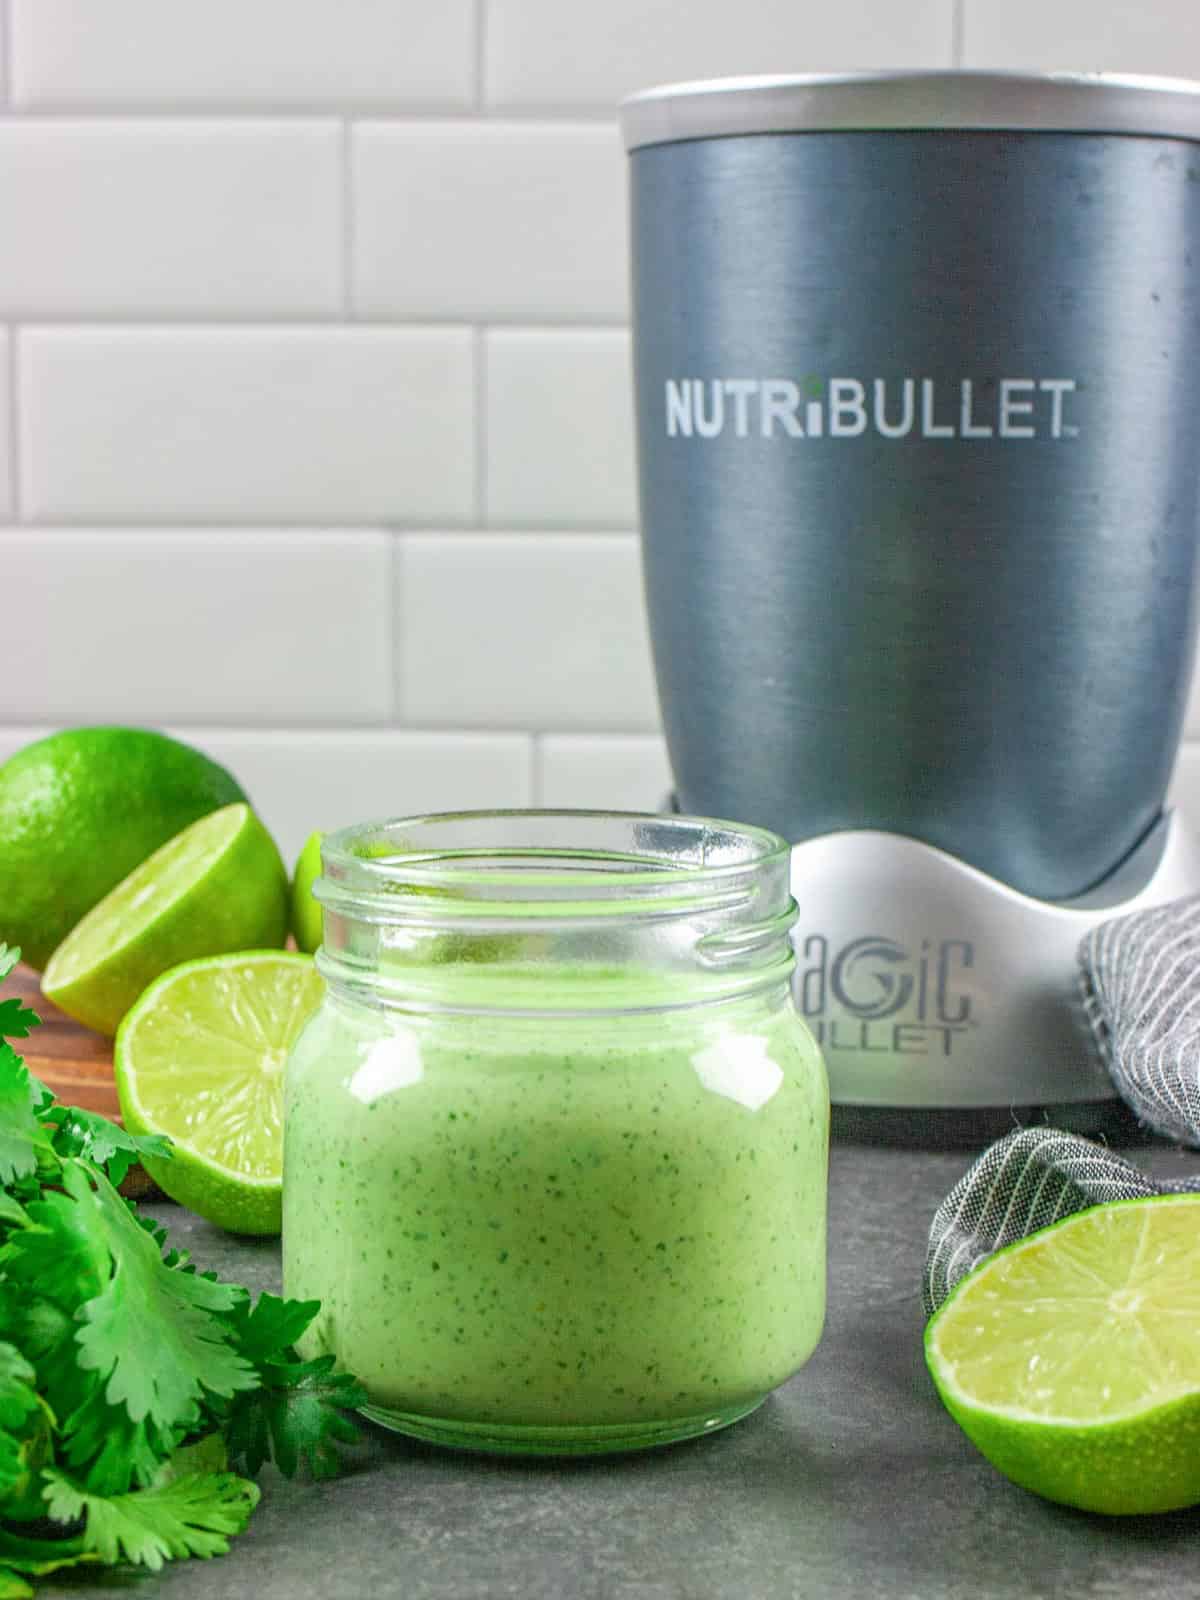 Wide mouth jar of creamy dressing sitting in front of a nutribullet blender with some lime halves and cilantro surrounding the jar.